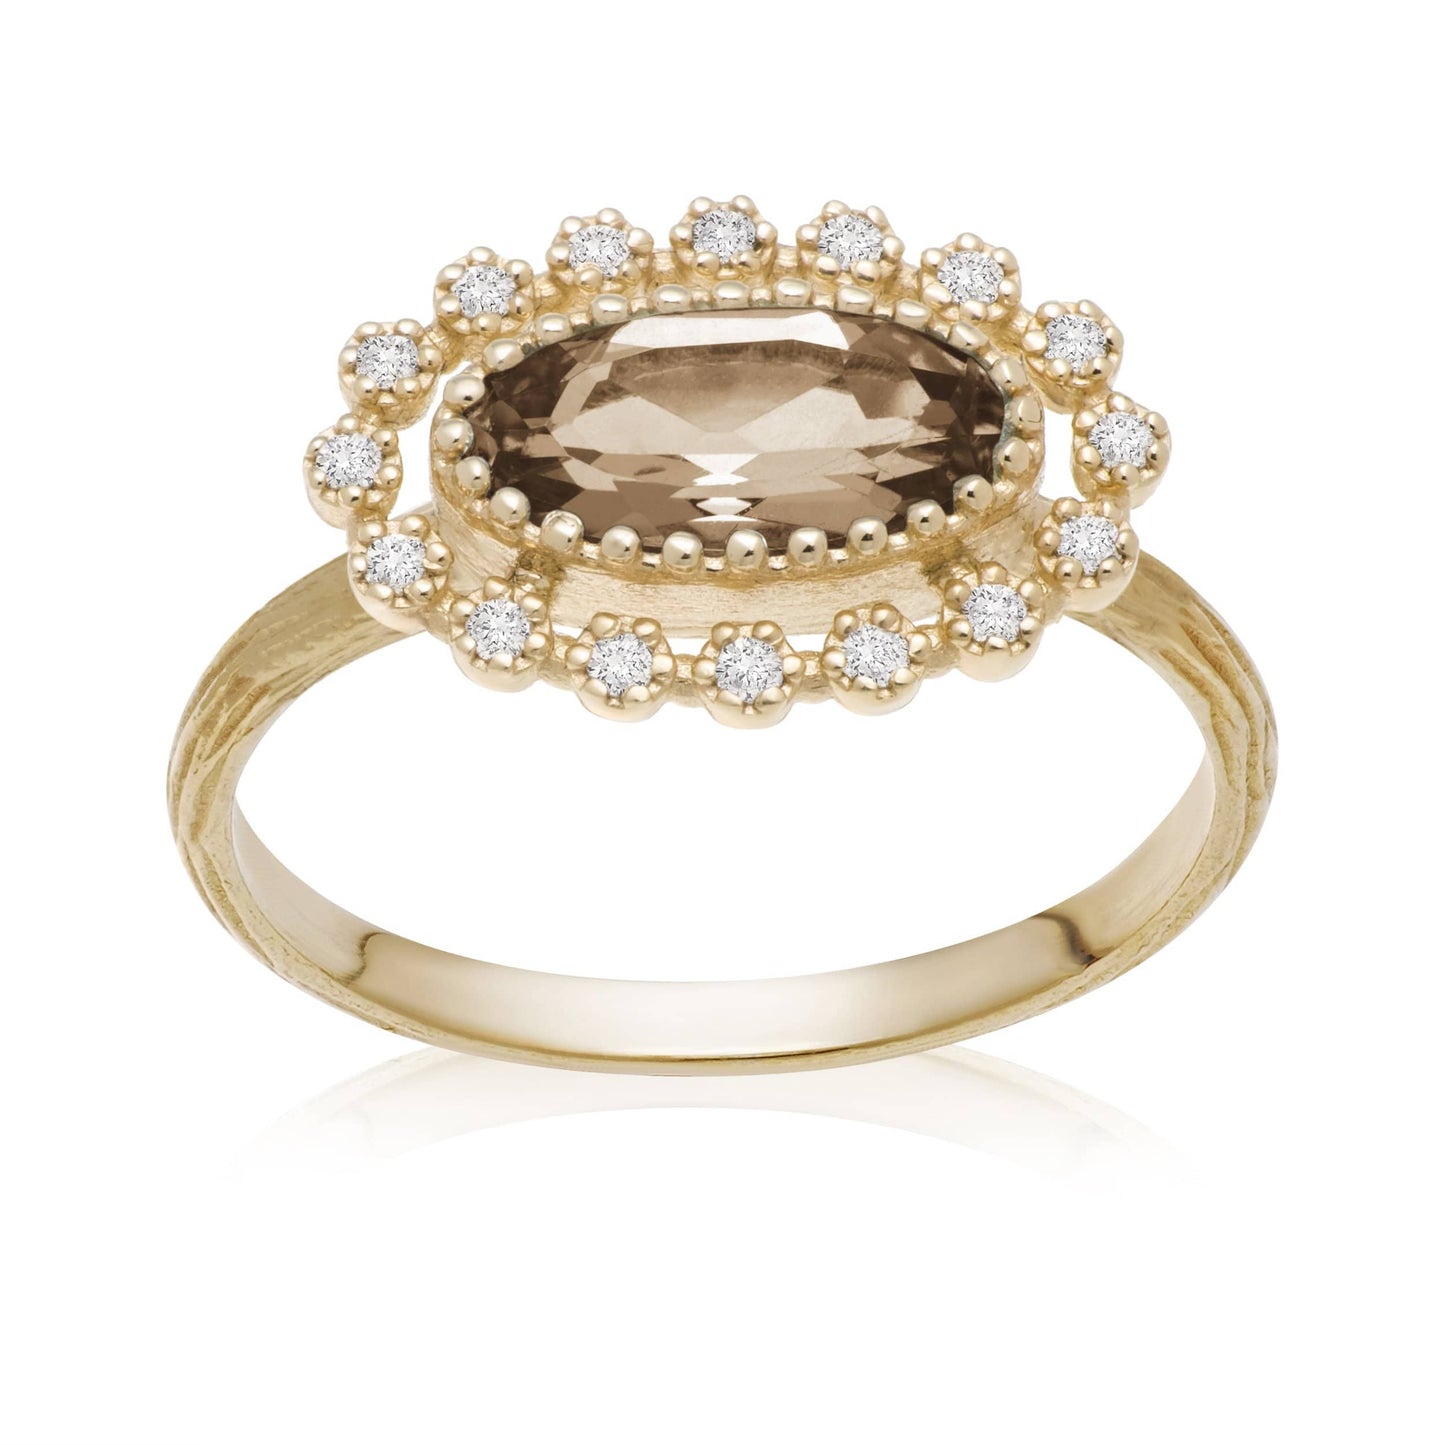 Dalia T Online Ring Lace Collection 14KT Yellow Gold Oval Smoky Quartz & Diamond Ring